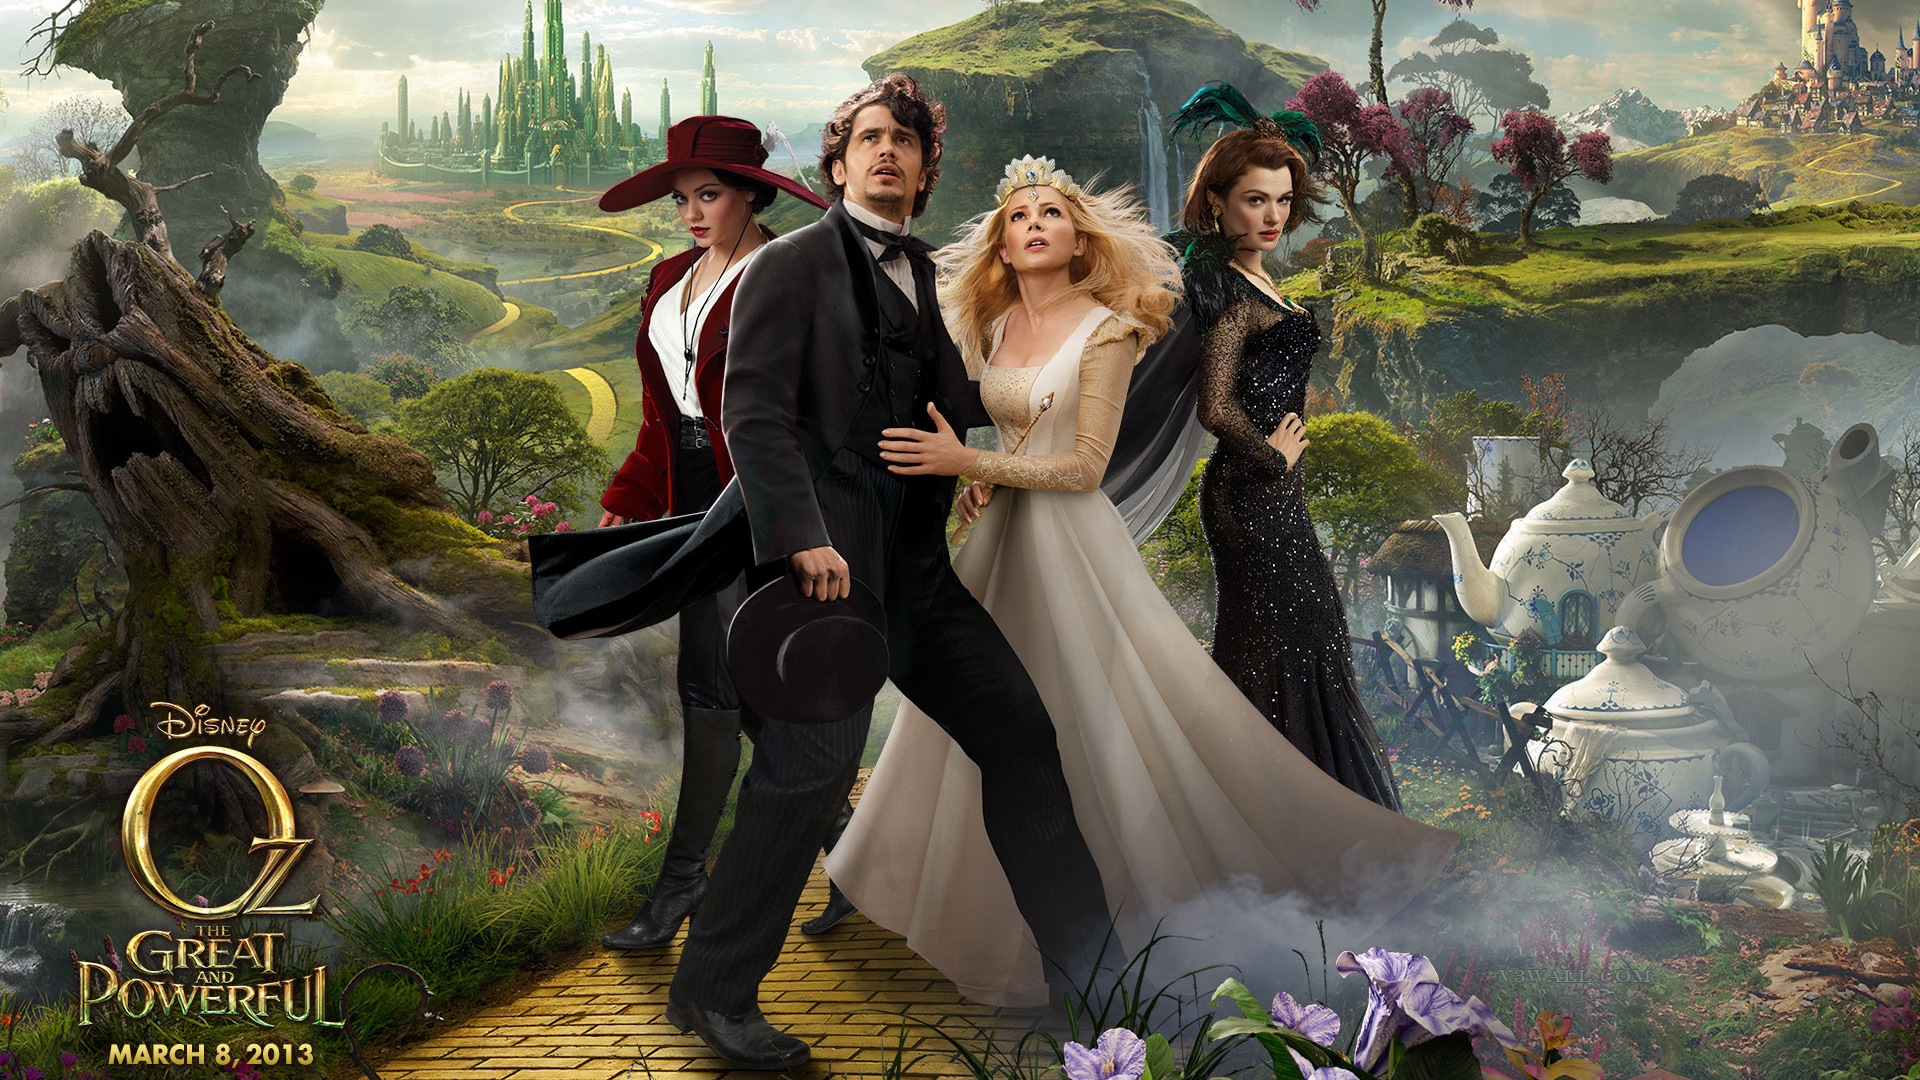 Oz The Great and Powerful 2013 HD wallpapers #1 - 1920x1080